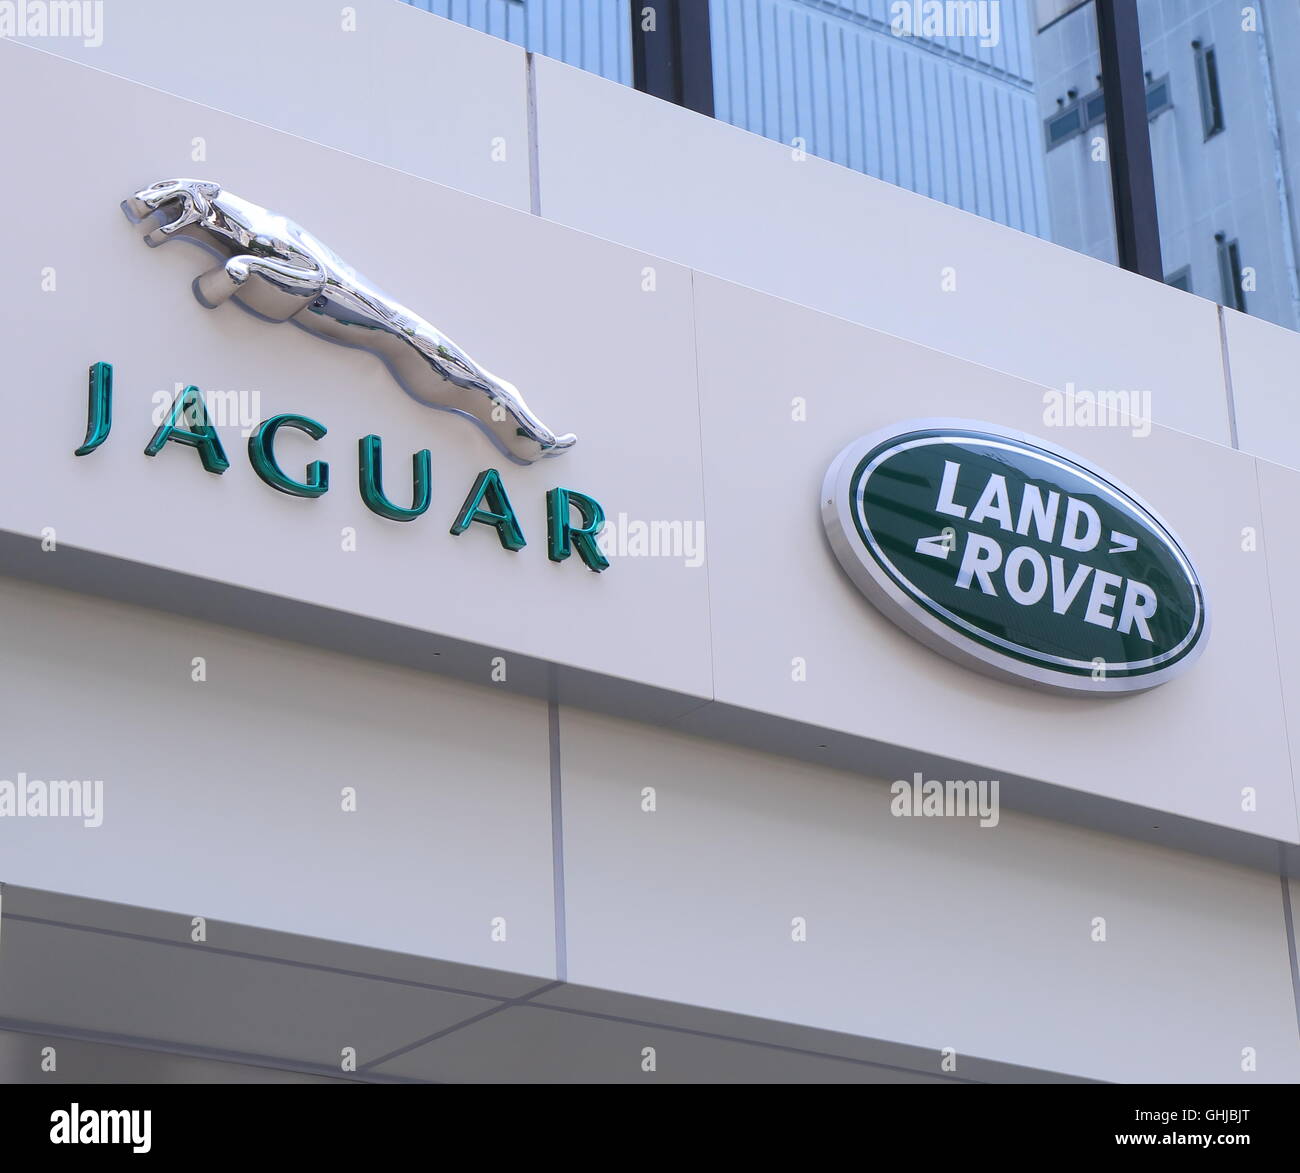 Jaguar Land Rover company logo British multinational car manufacturer headquartered in Coventry England. Stock Photo